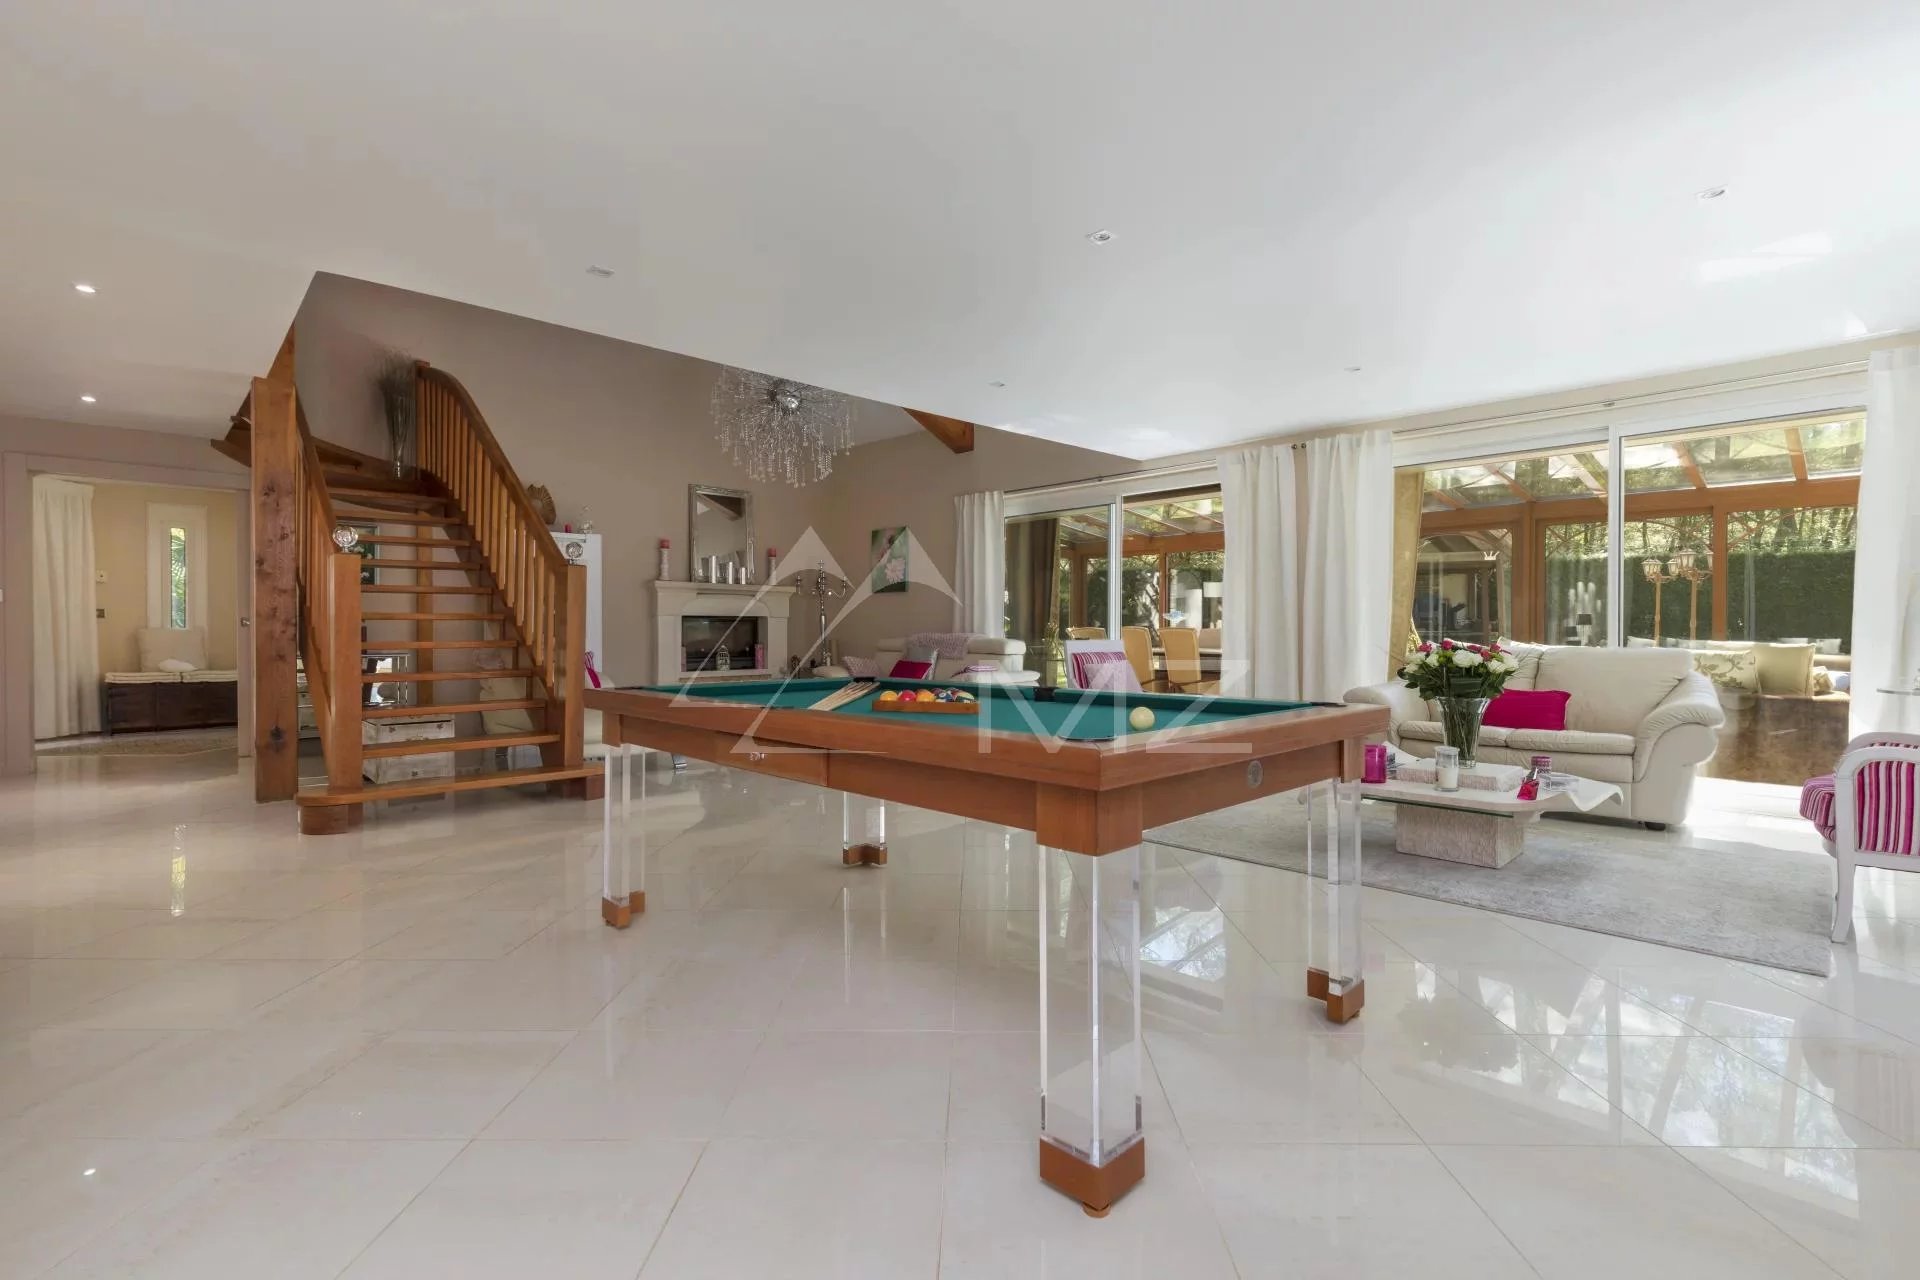 Exceptional four-bedroom villa with veranda, garden, tennis court and swimming pool